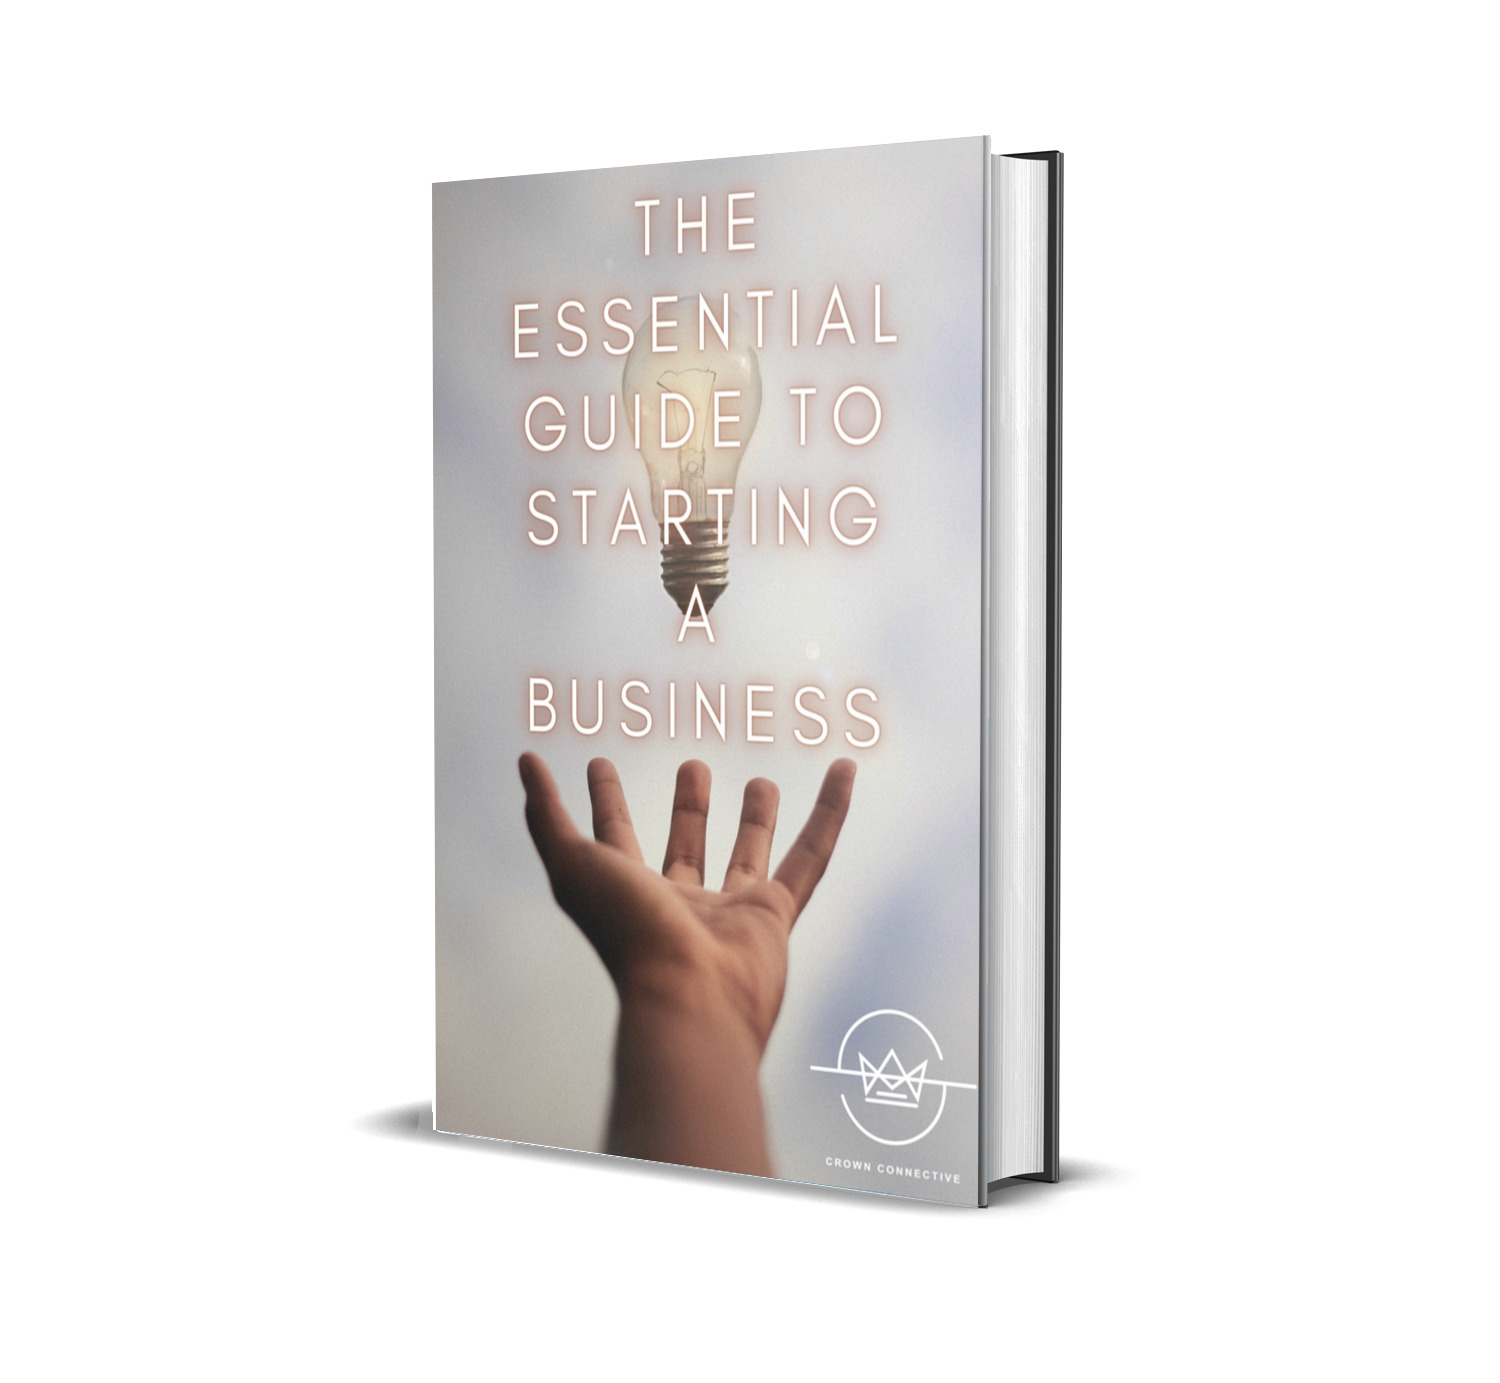 The Essential Guide to Starting a Business